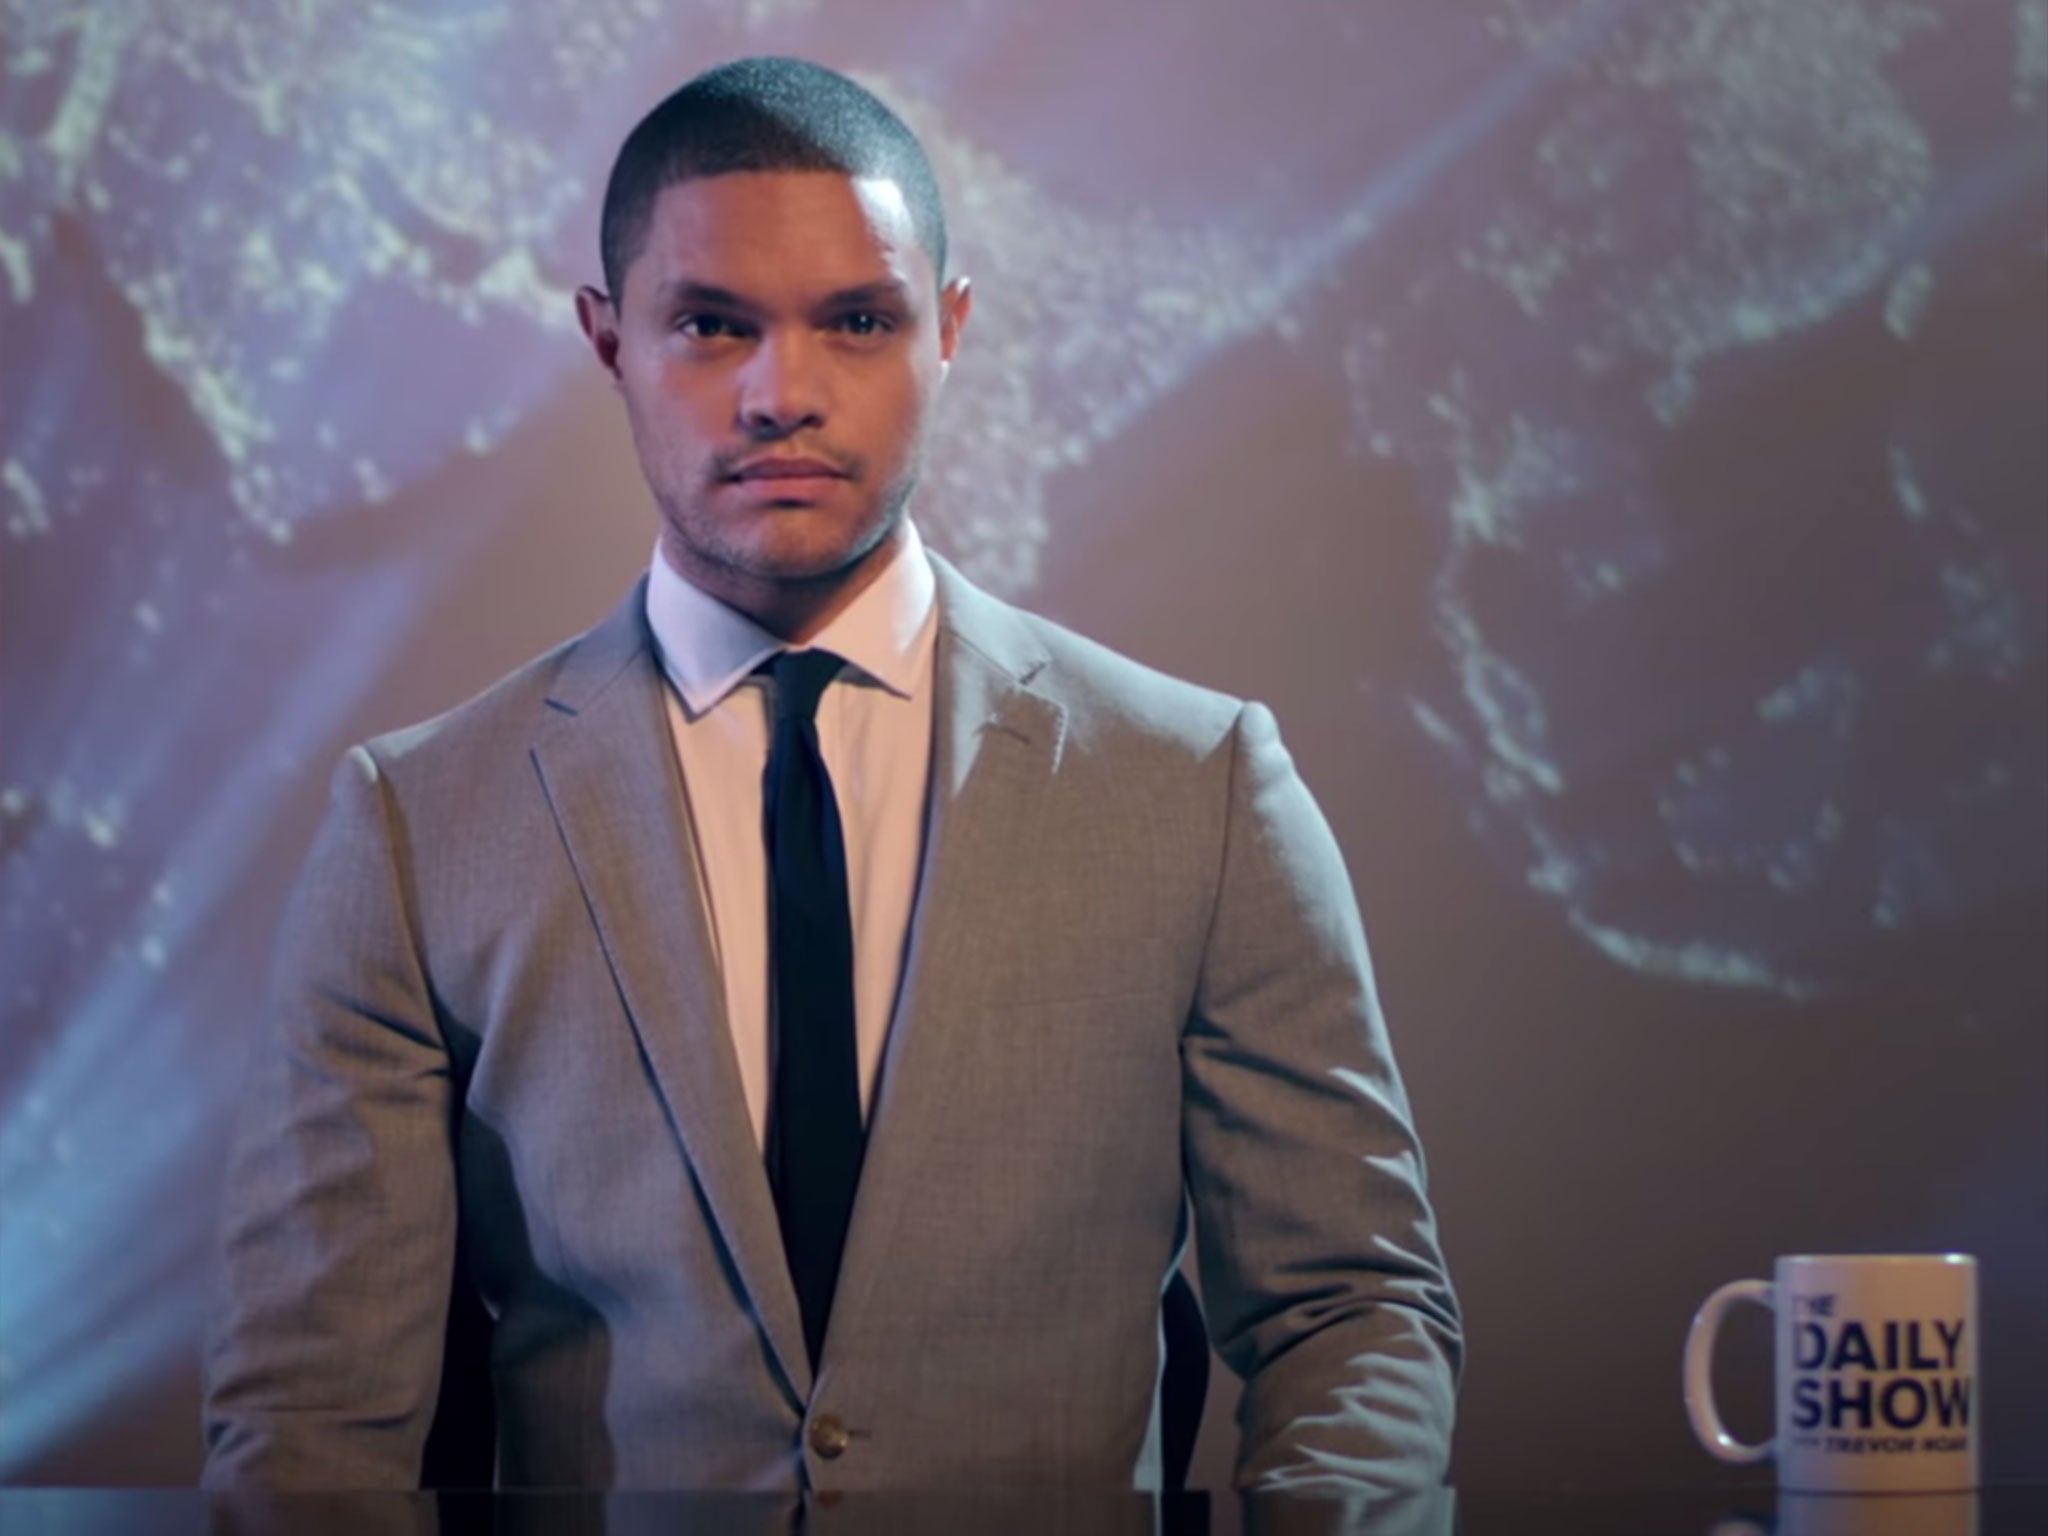 Trevor Noah in the new trailer for the Daily Show